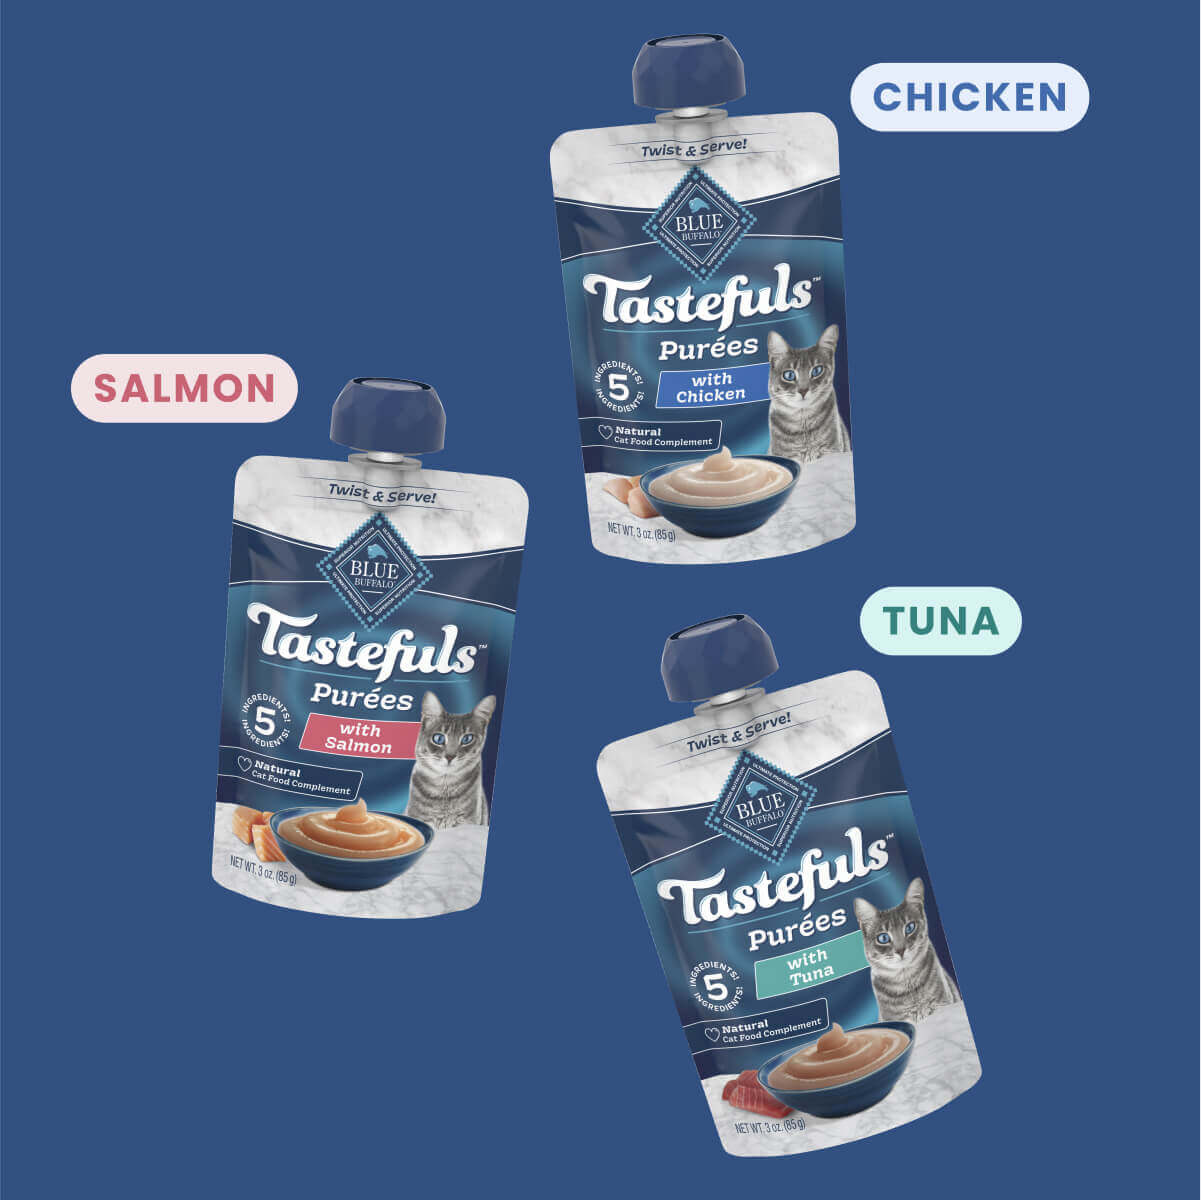 Tasteful cat Purées chicken, salmon and tuna packs